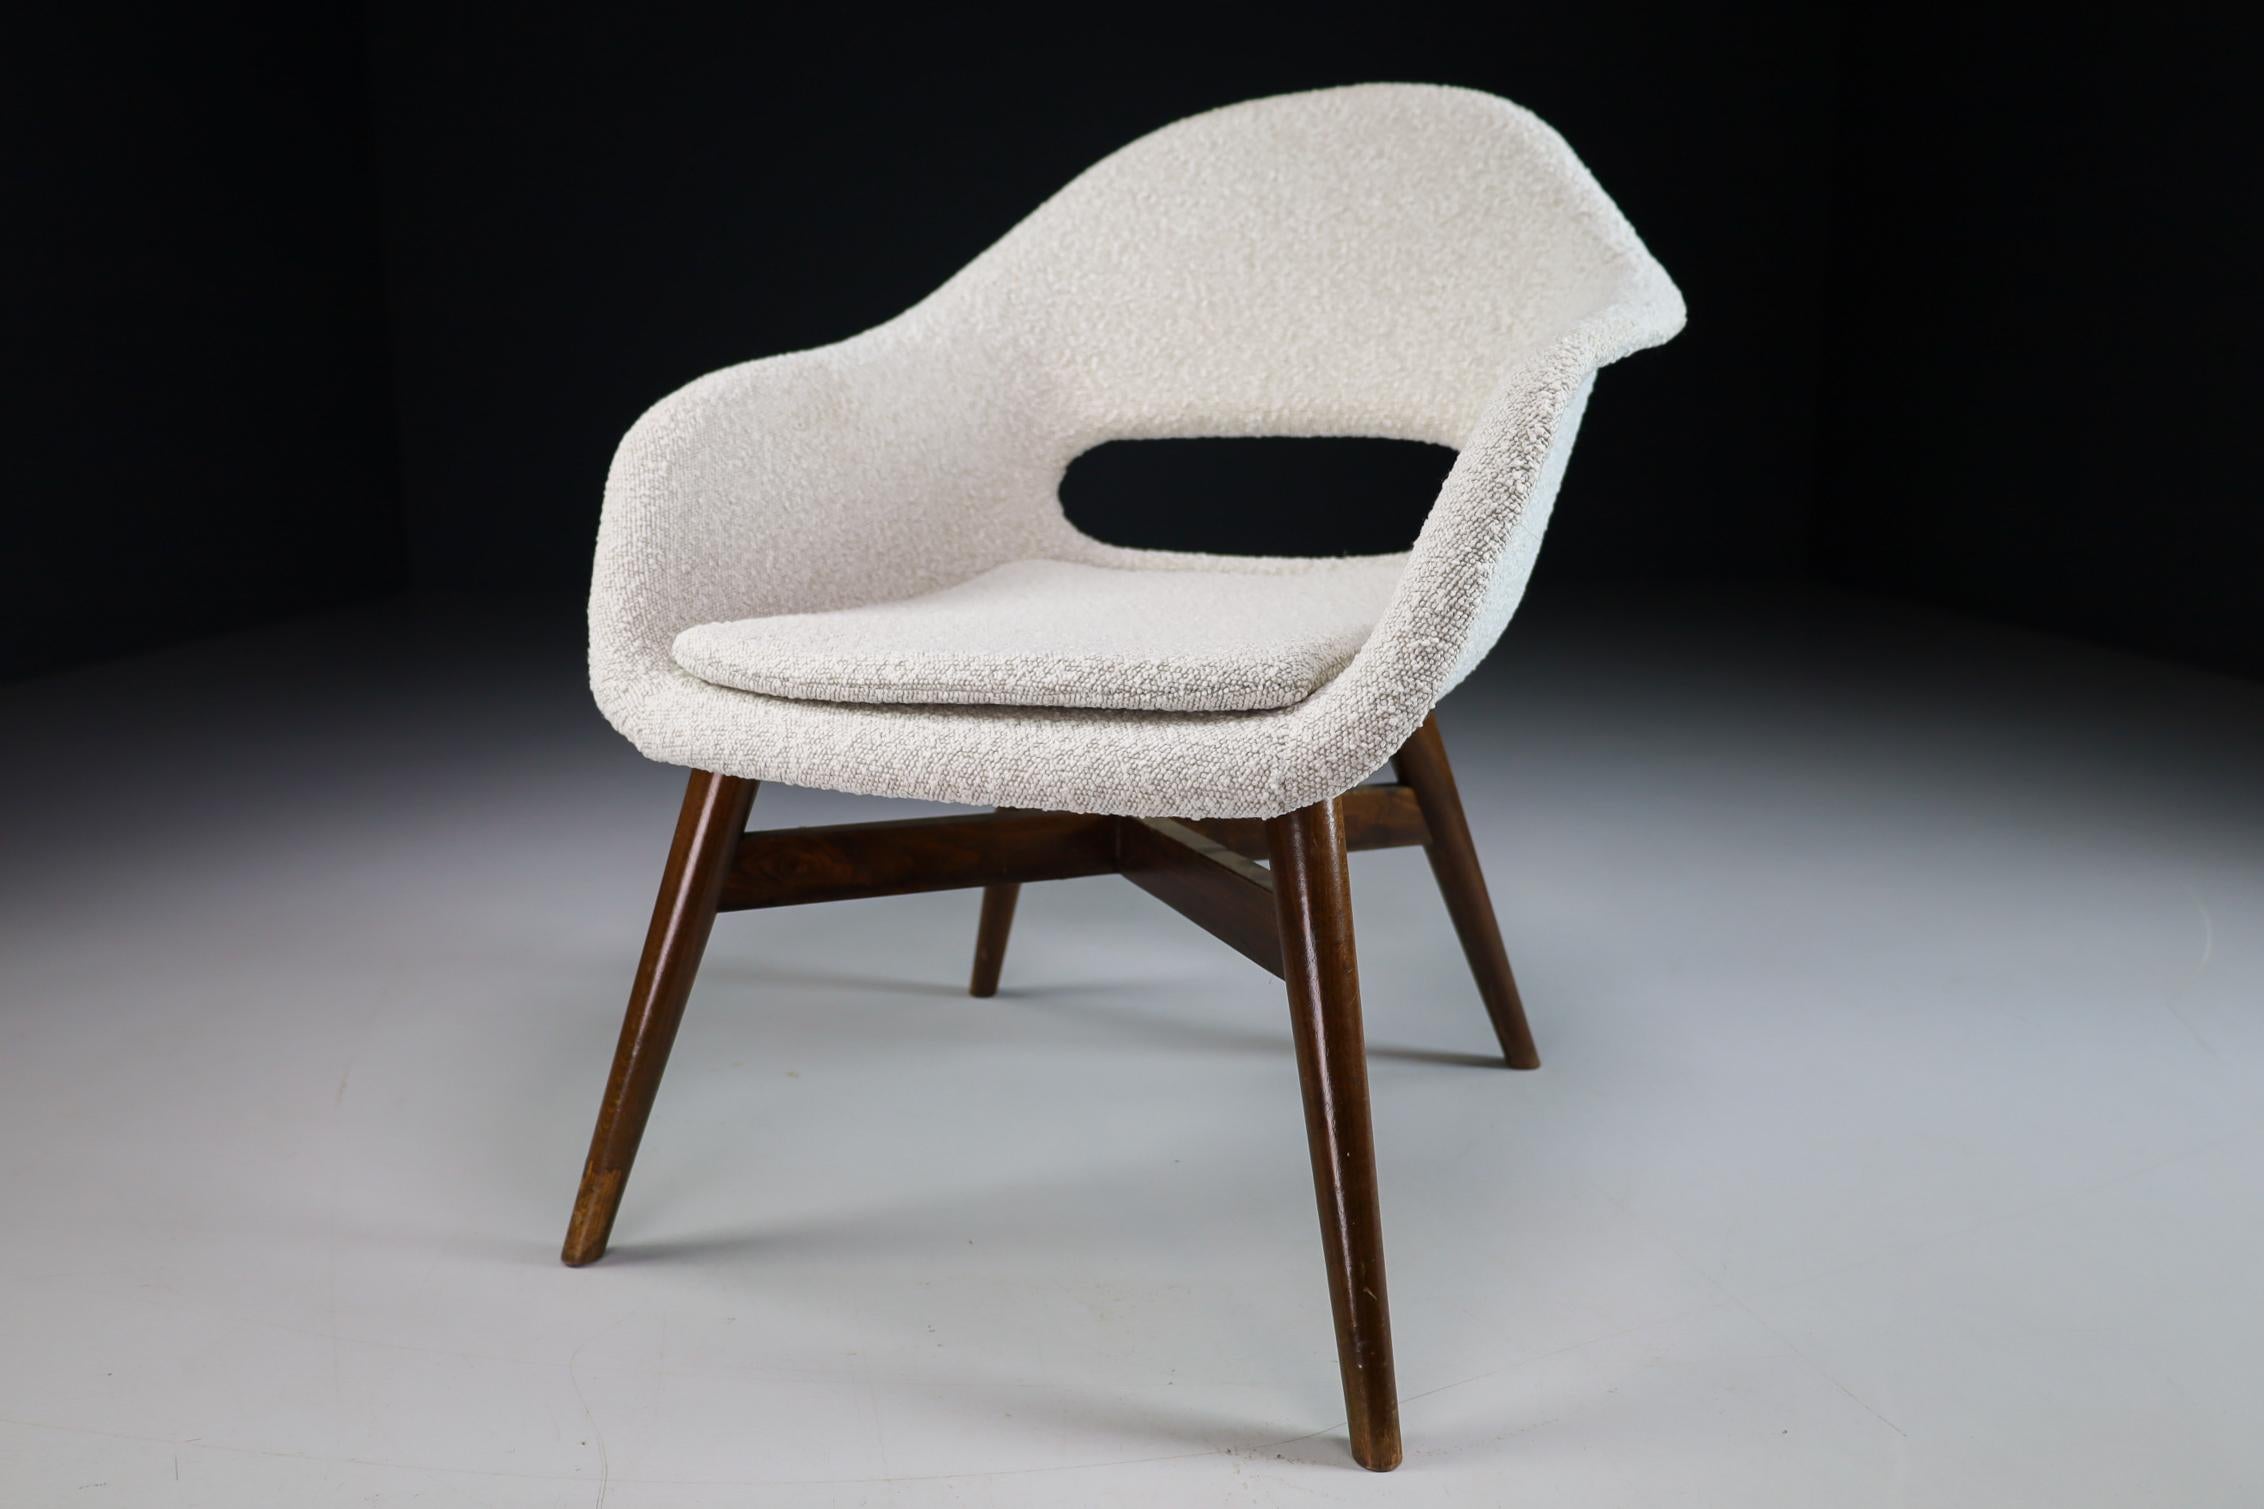 Miroslav Navratil lounge chair with fiberglass shell in new upholstery Bouclé fabric. The wooden base made of stained beech or walnut is also in a very good condition, manufactured in the Czech Republic in the early 1960s. This armchair / lounge